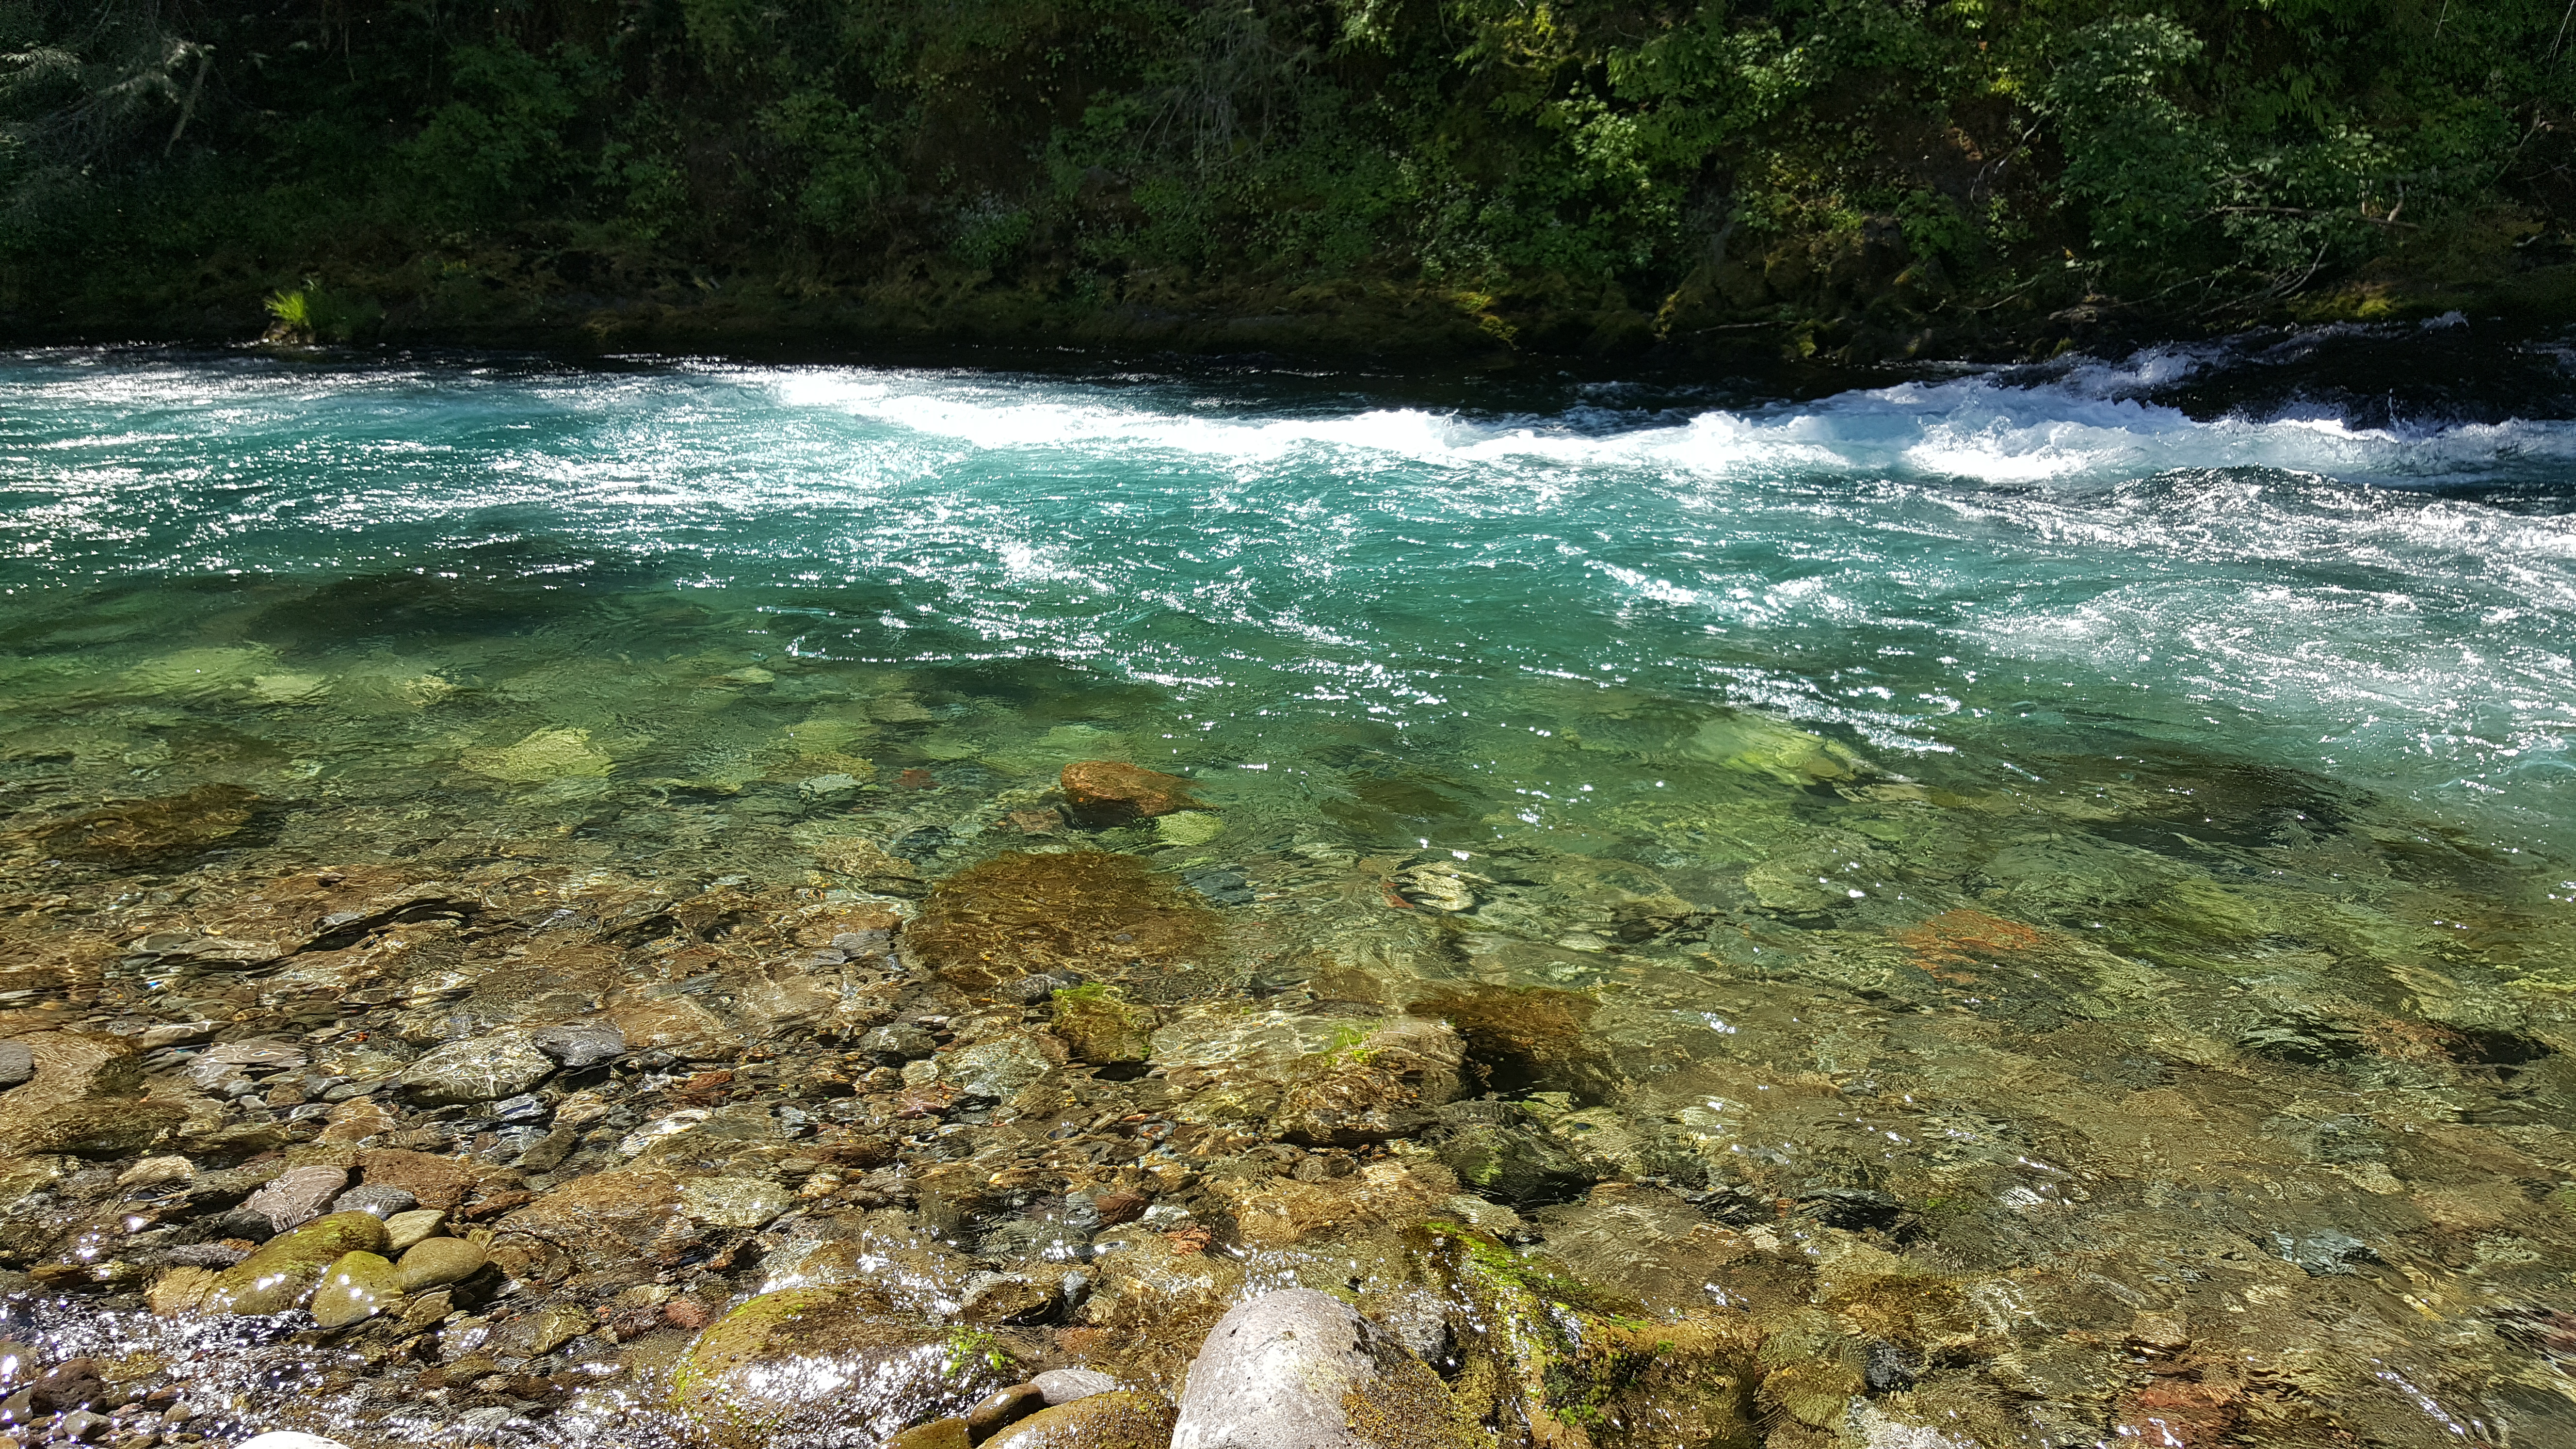 The beautiful blue-clear waters of the McKenzie River